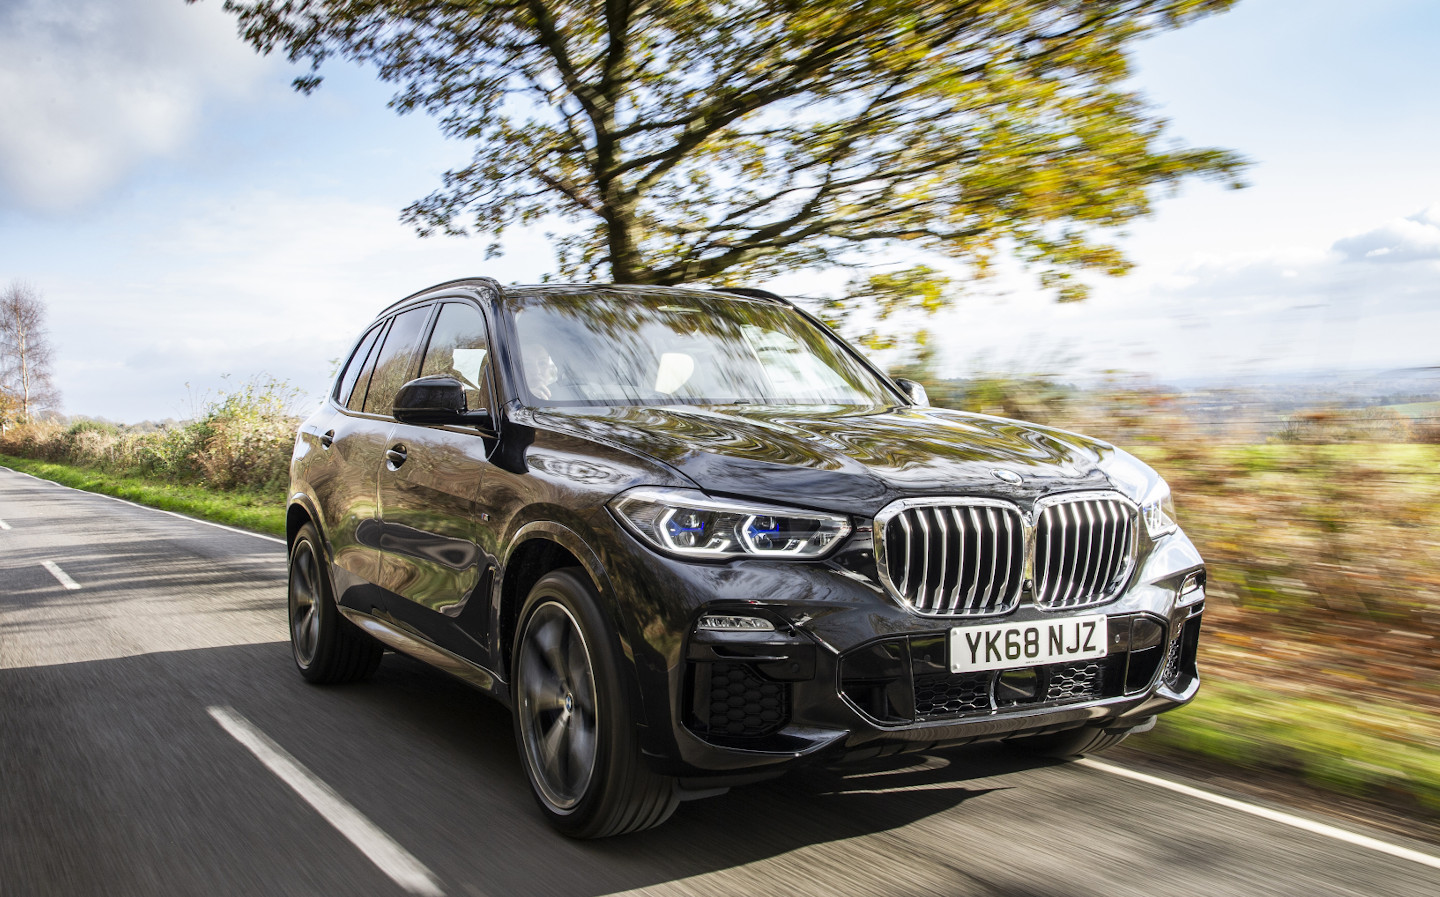 BMW X5 is most clocked car, says research